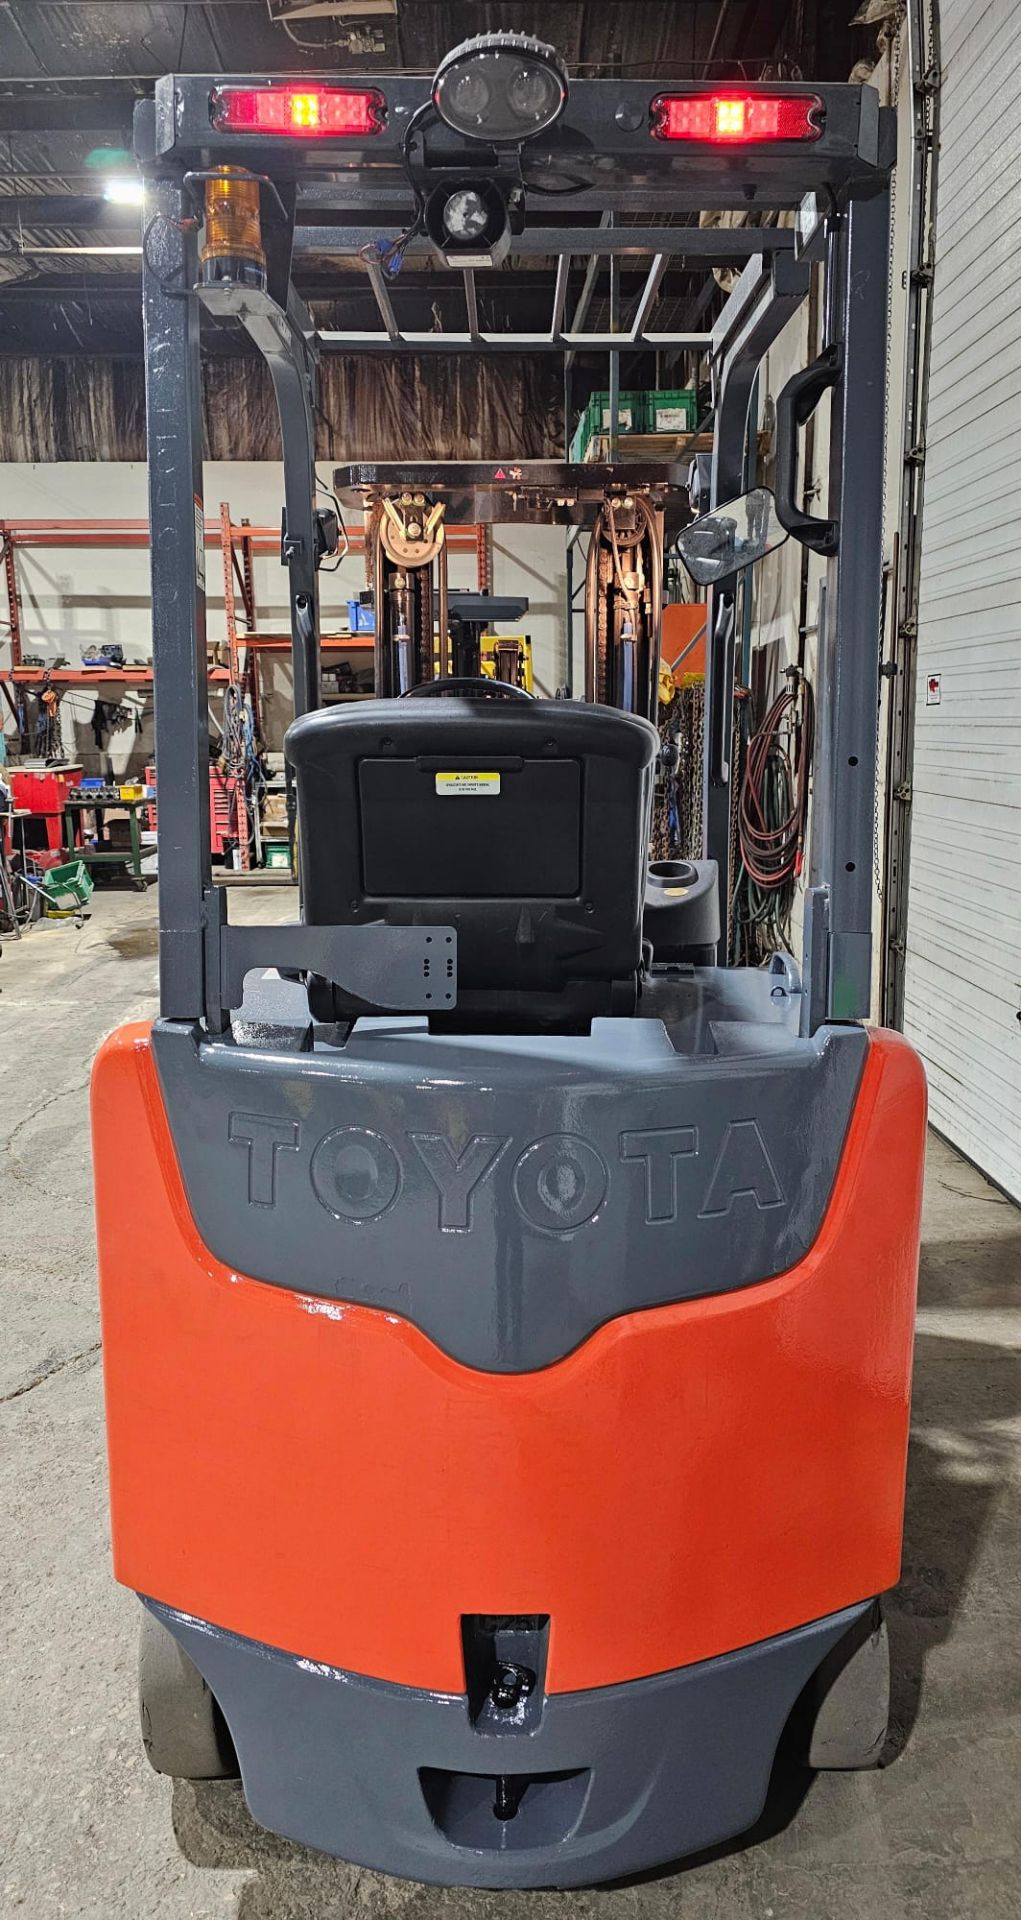 2012 TOYOTA 5,000lbs Capacity Electric Forklift 48V with sideshift & 3-Stage Mast 189" Lift Height - - Image 6 of 6